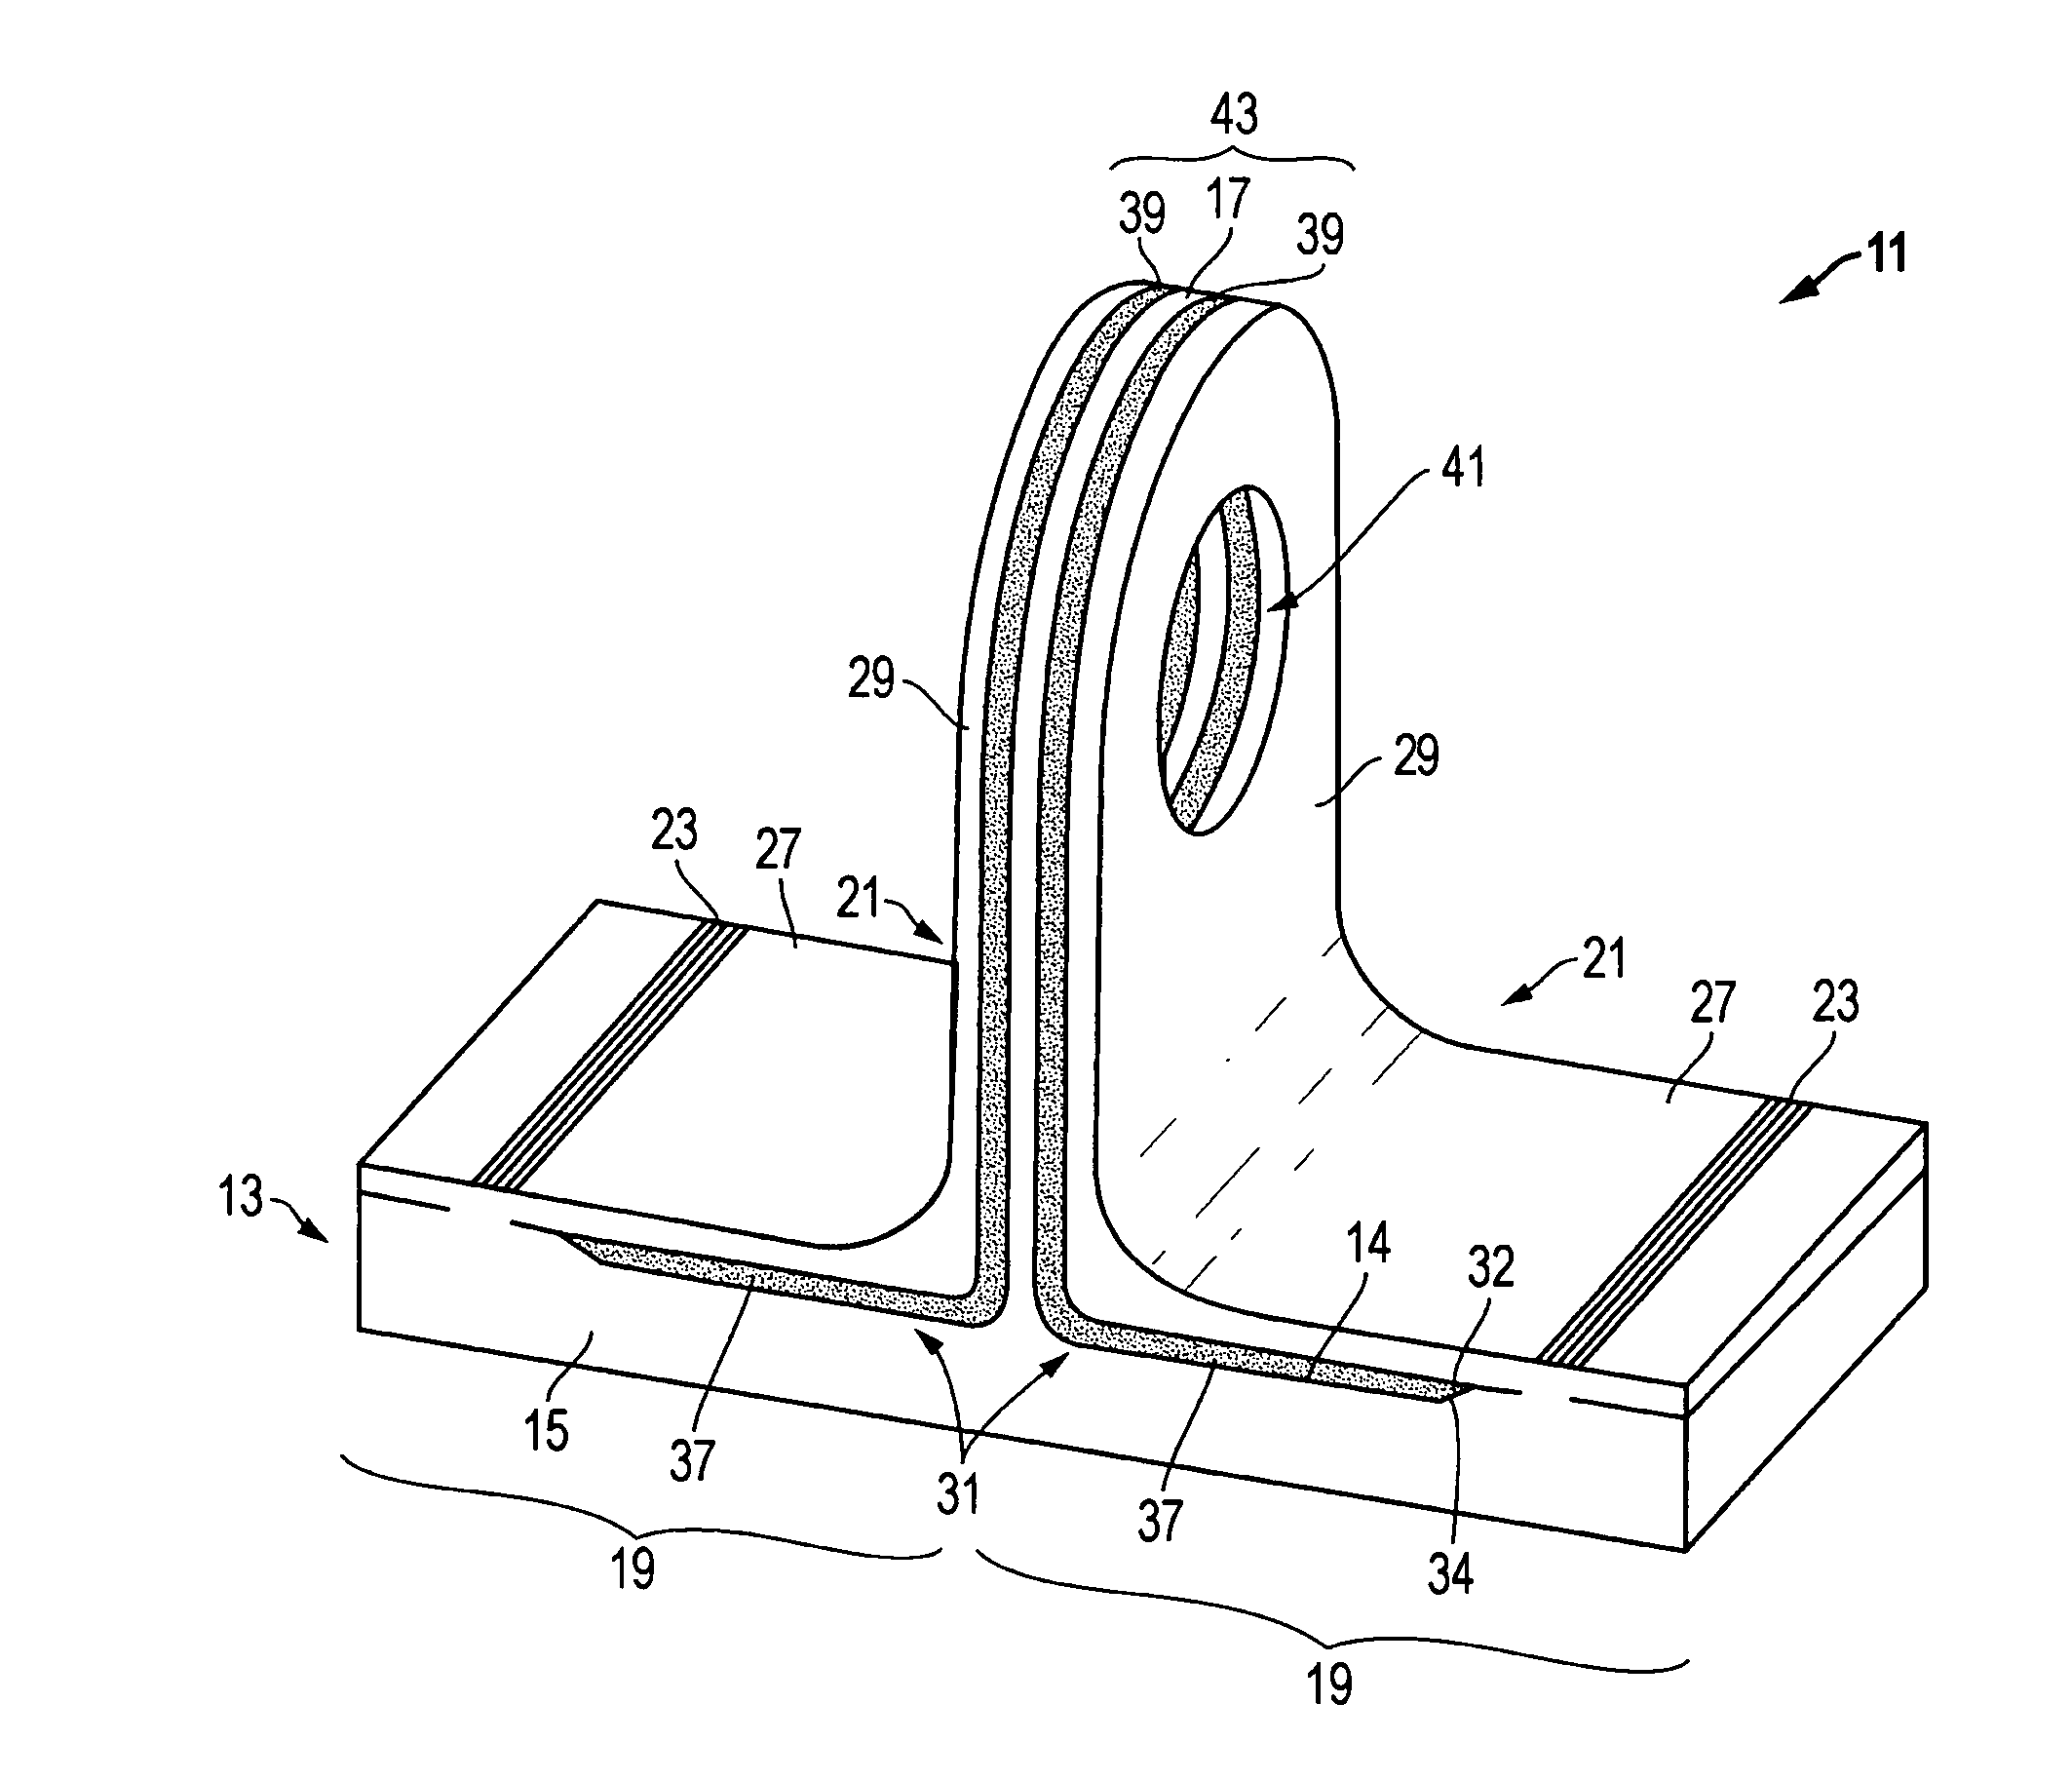 System, method, and apparatus for structural lug formed from a combination of metal and composite laminate materials